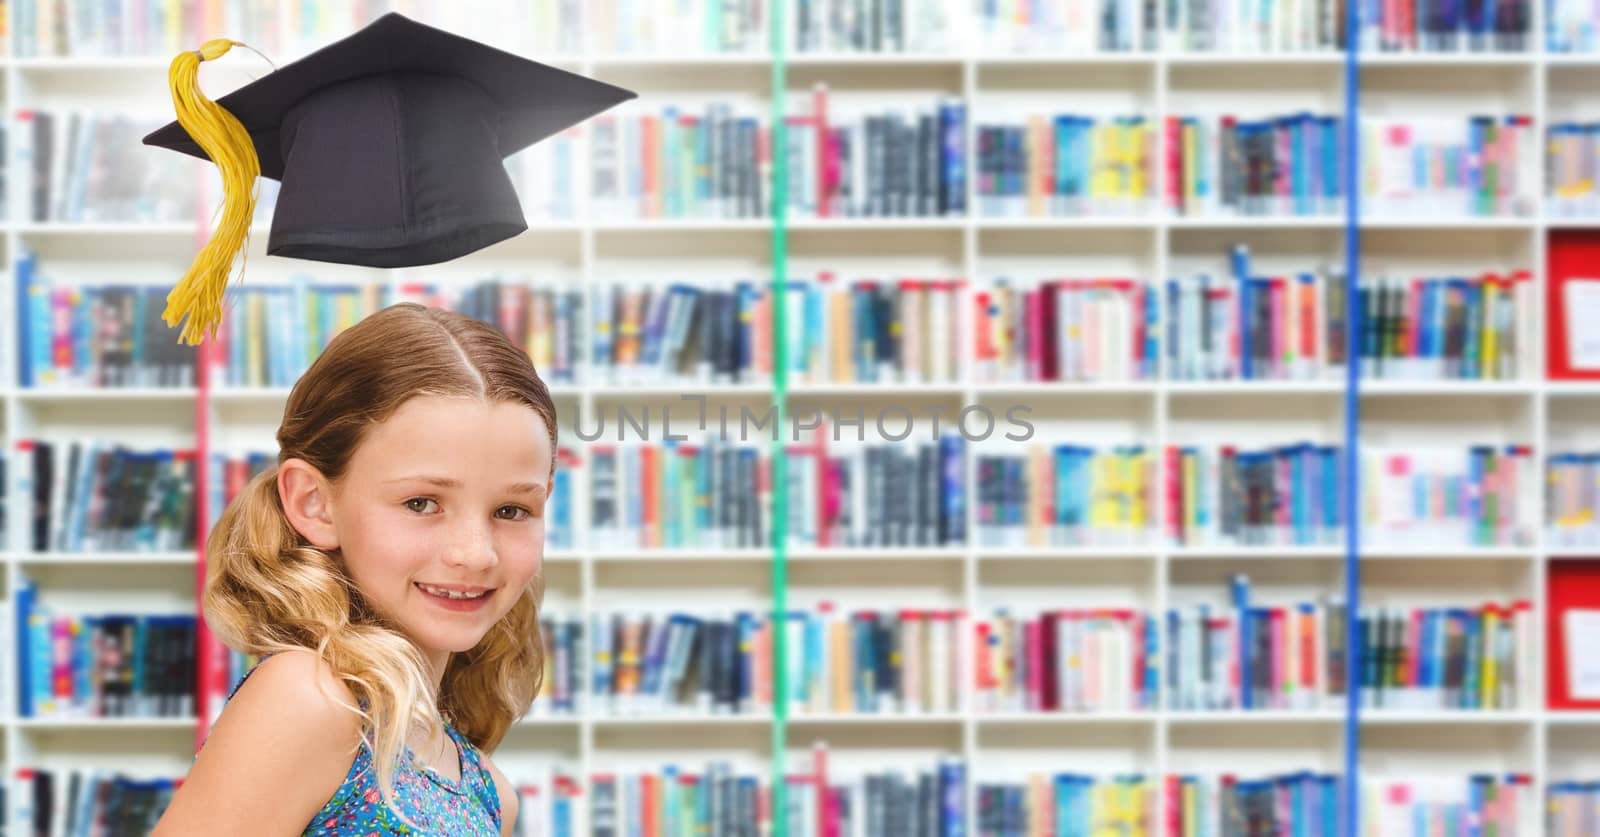 Digital composite of School girl in education library with graduation hat